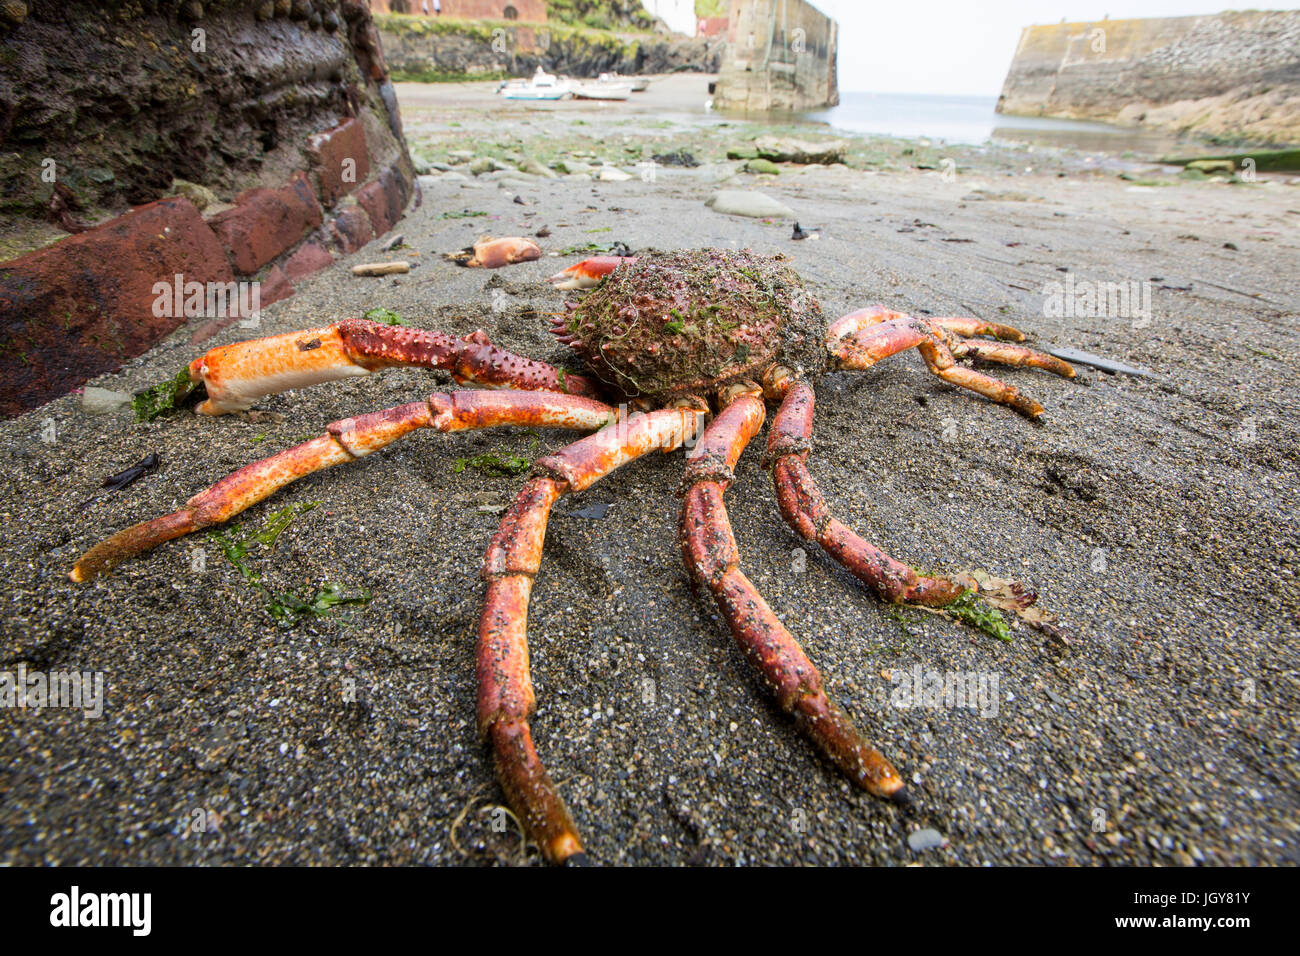 A spider Crab washed ashore in Porthgain harbour, Pembrokeshire, Wales, UK. Stock Photo